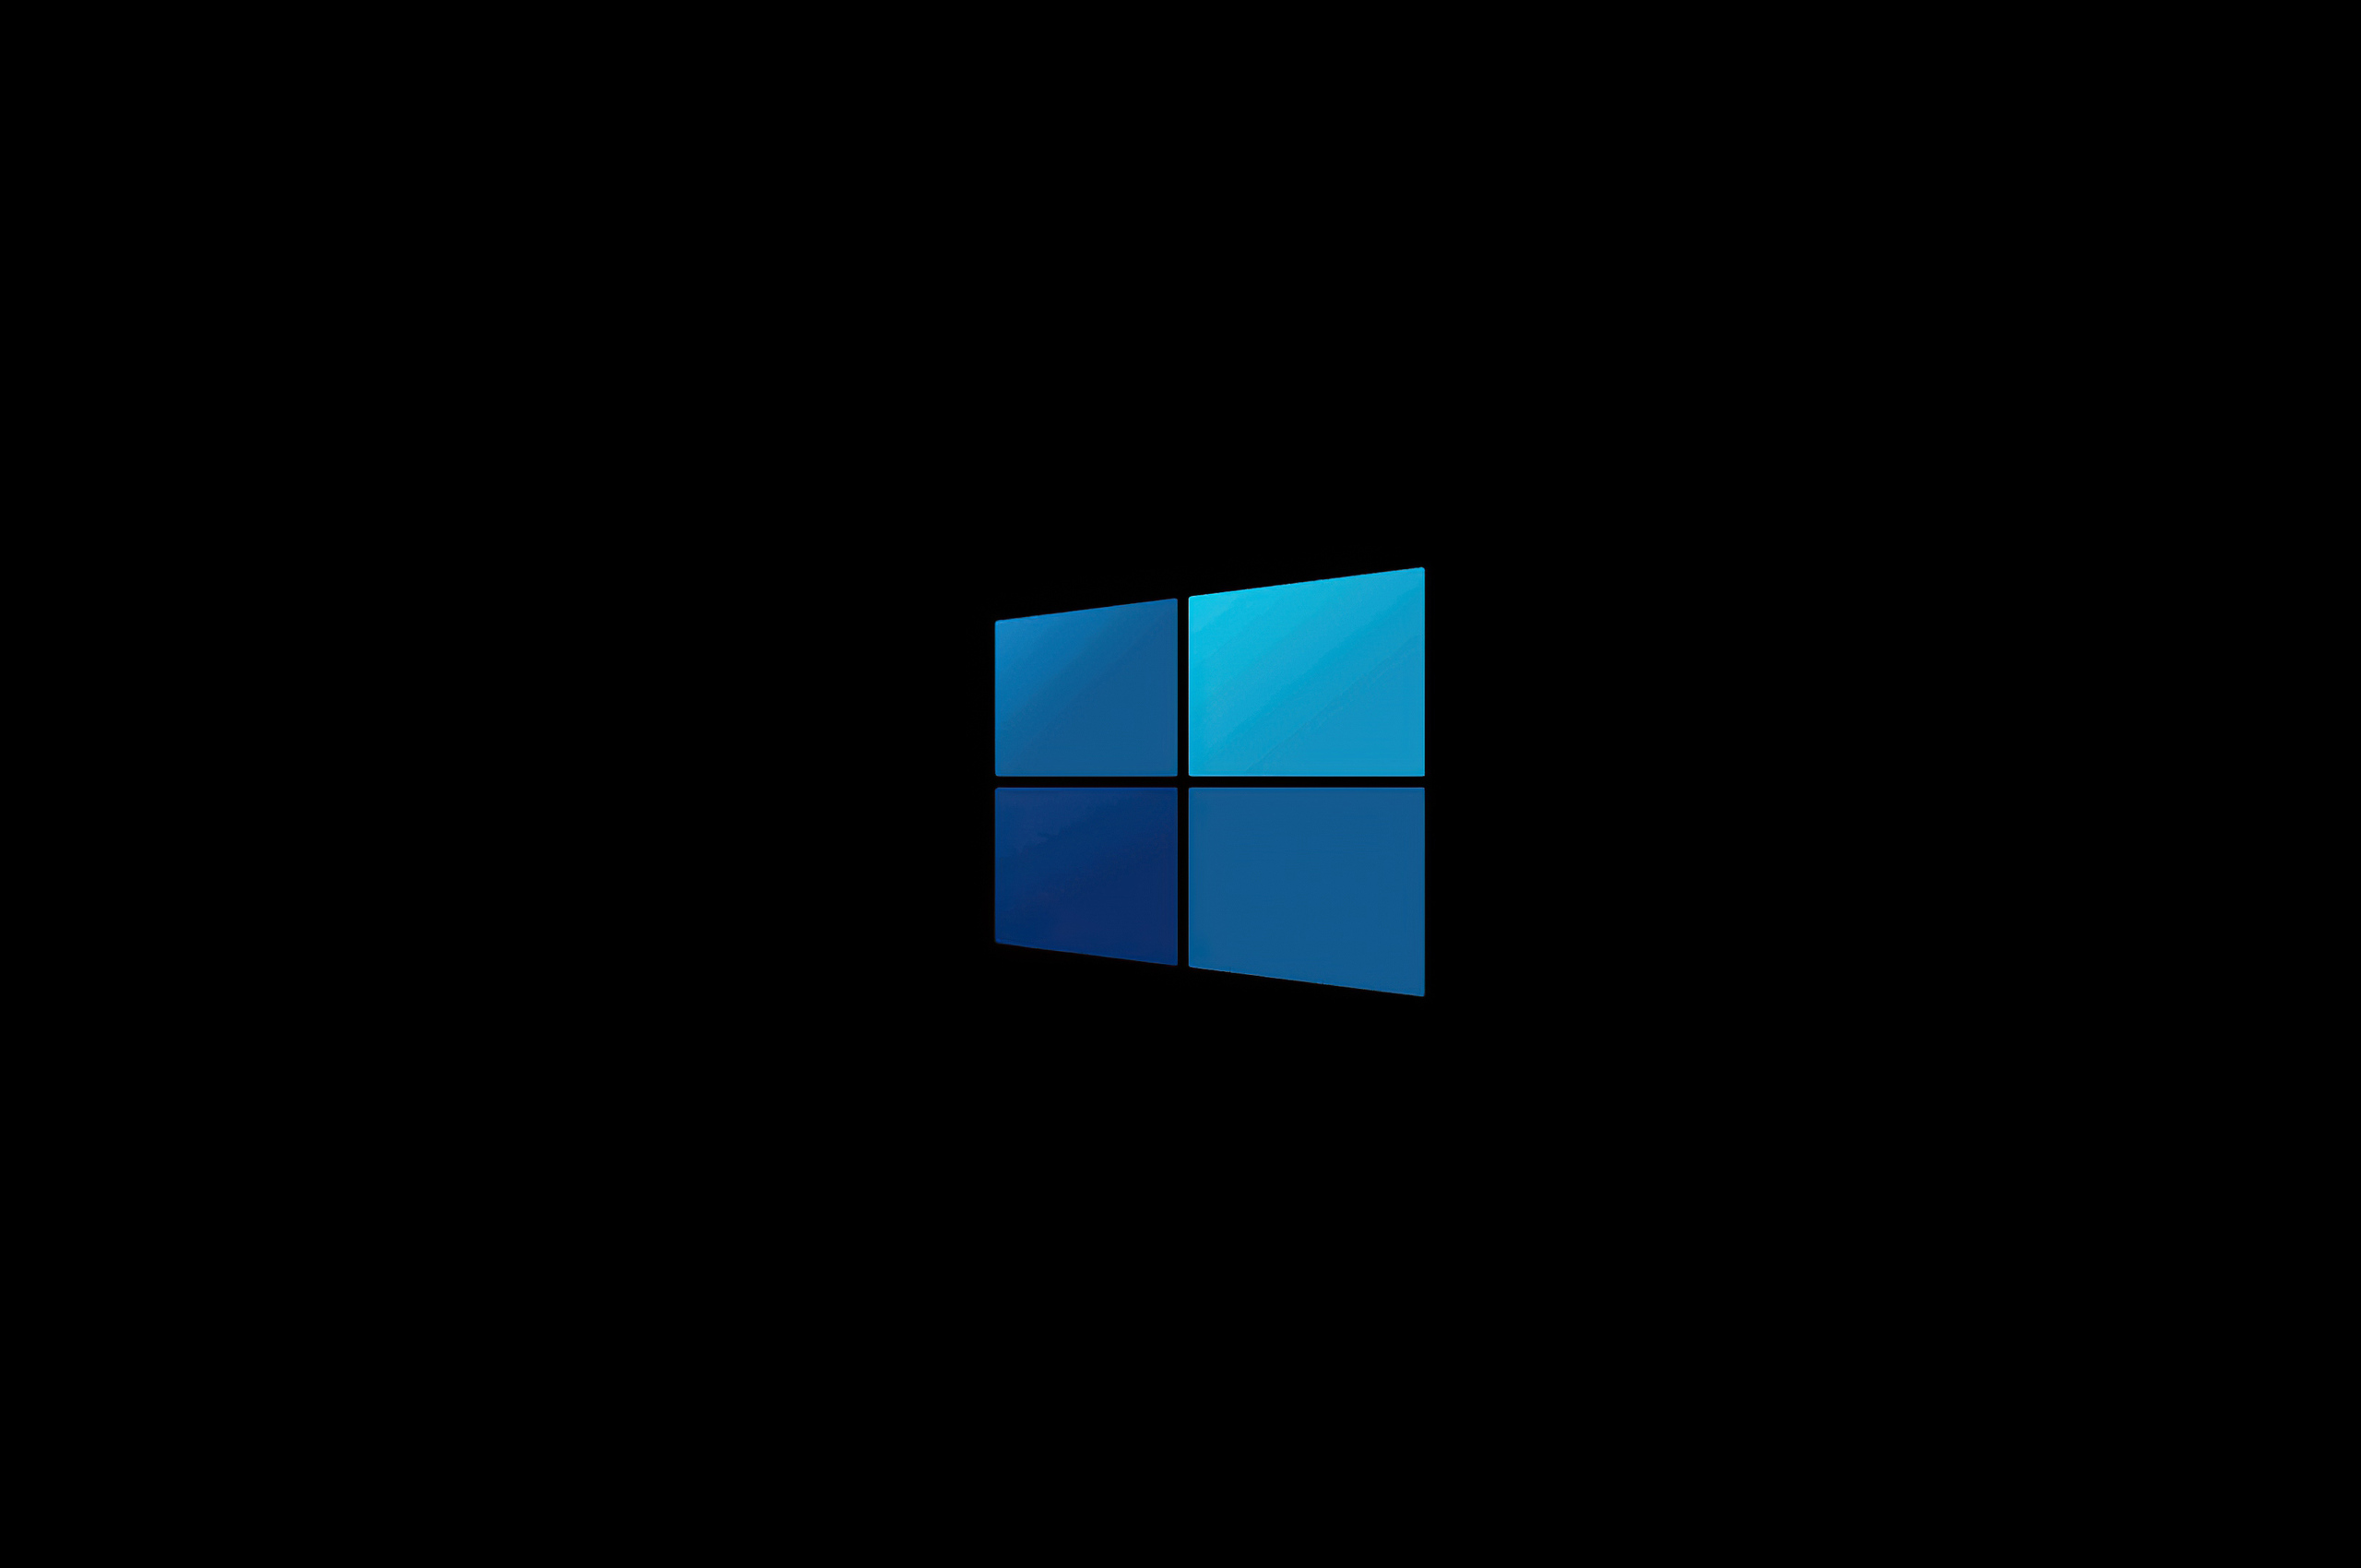 2560x1700 Windows 10 Minimal Logo 4k Chromebook Pixel HD 4k Wallpapers,  Images, Backgrounds, Photos and Pictures